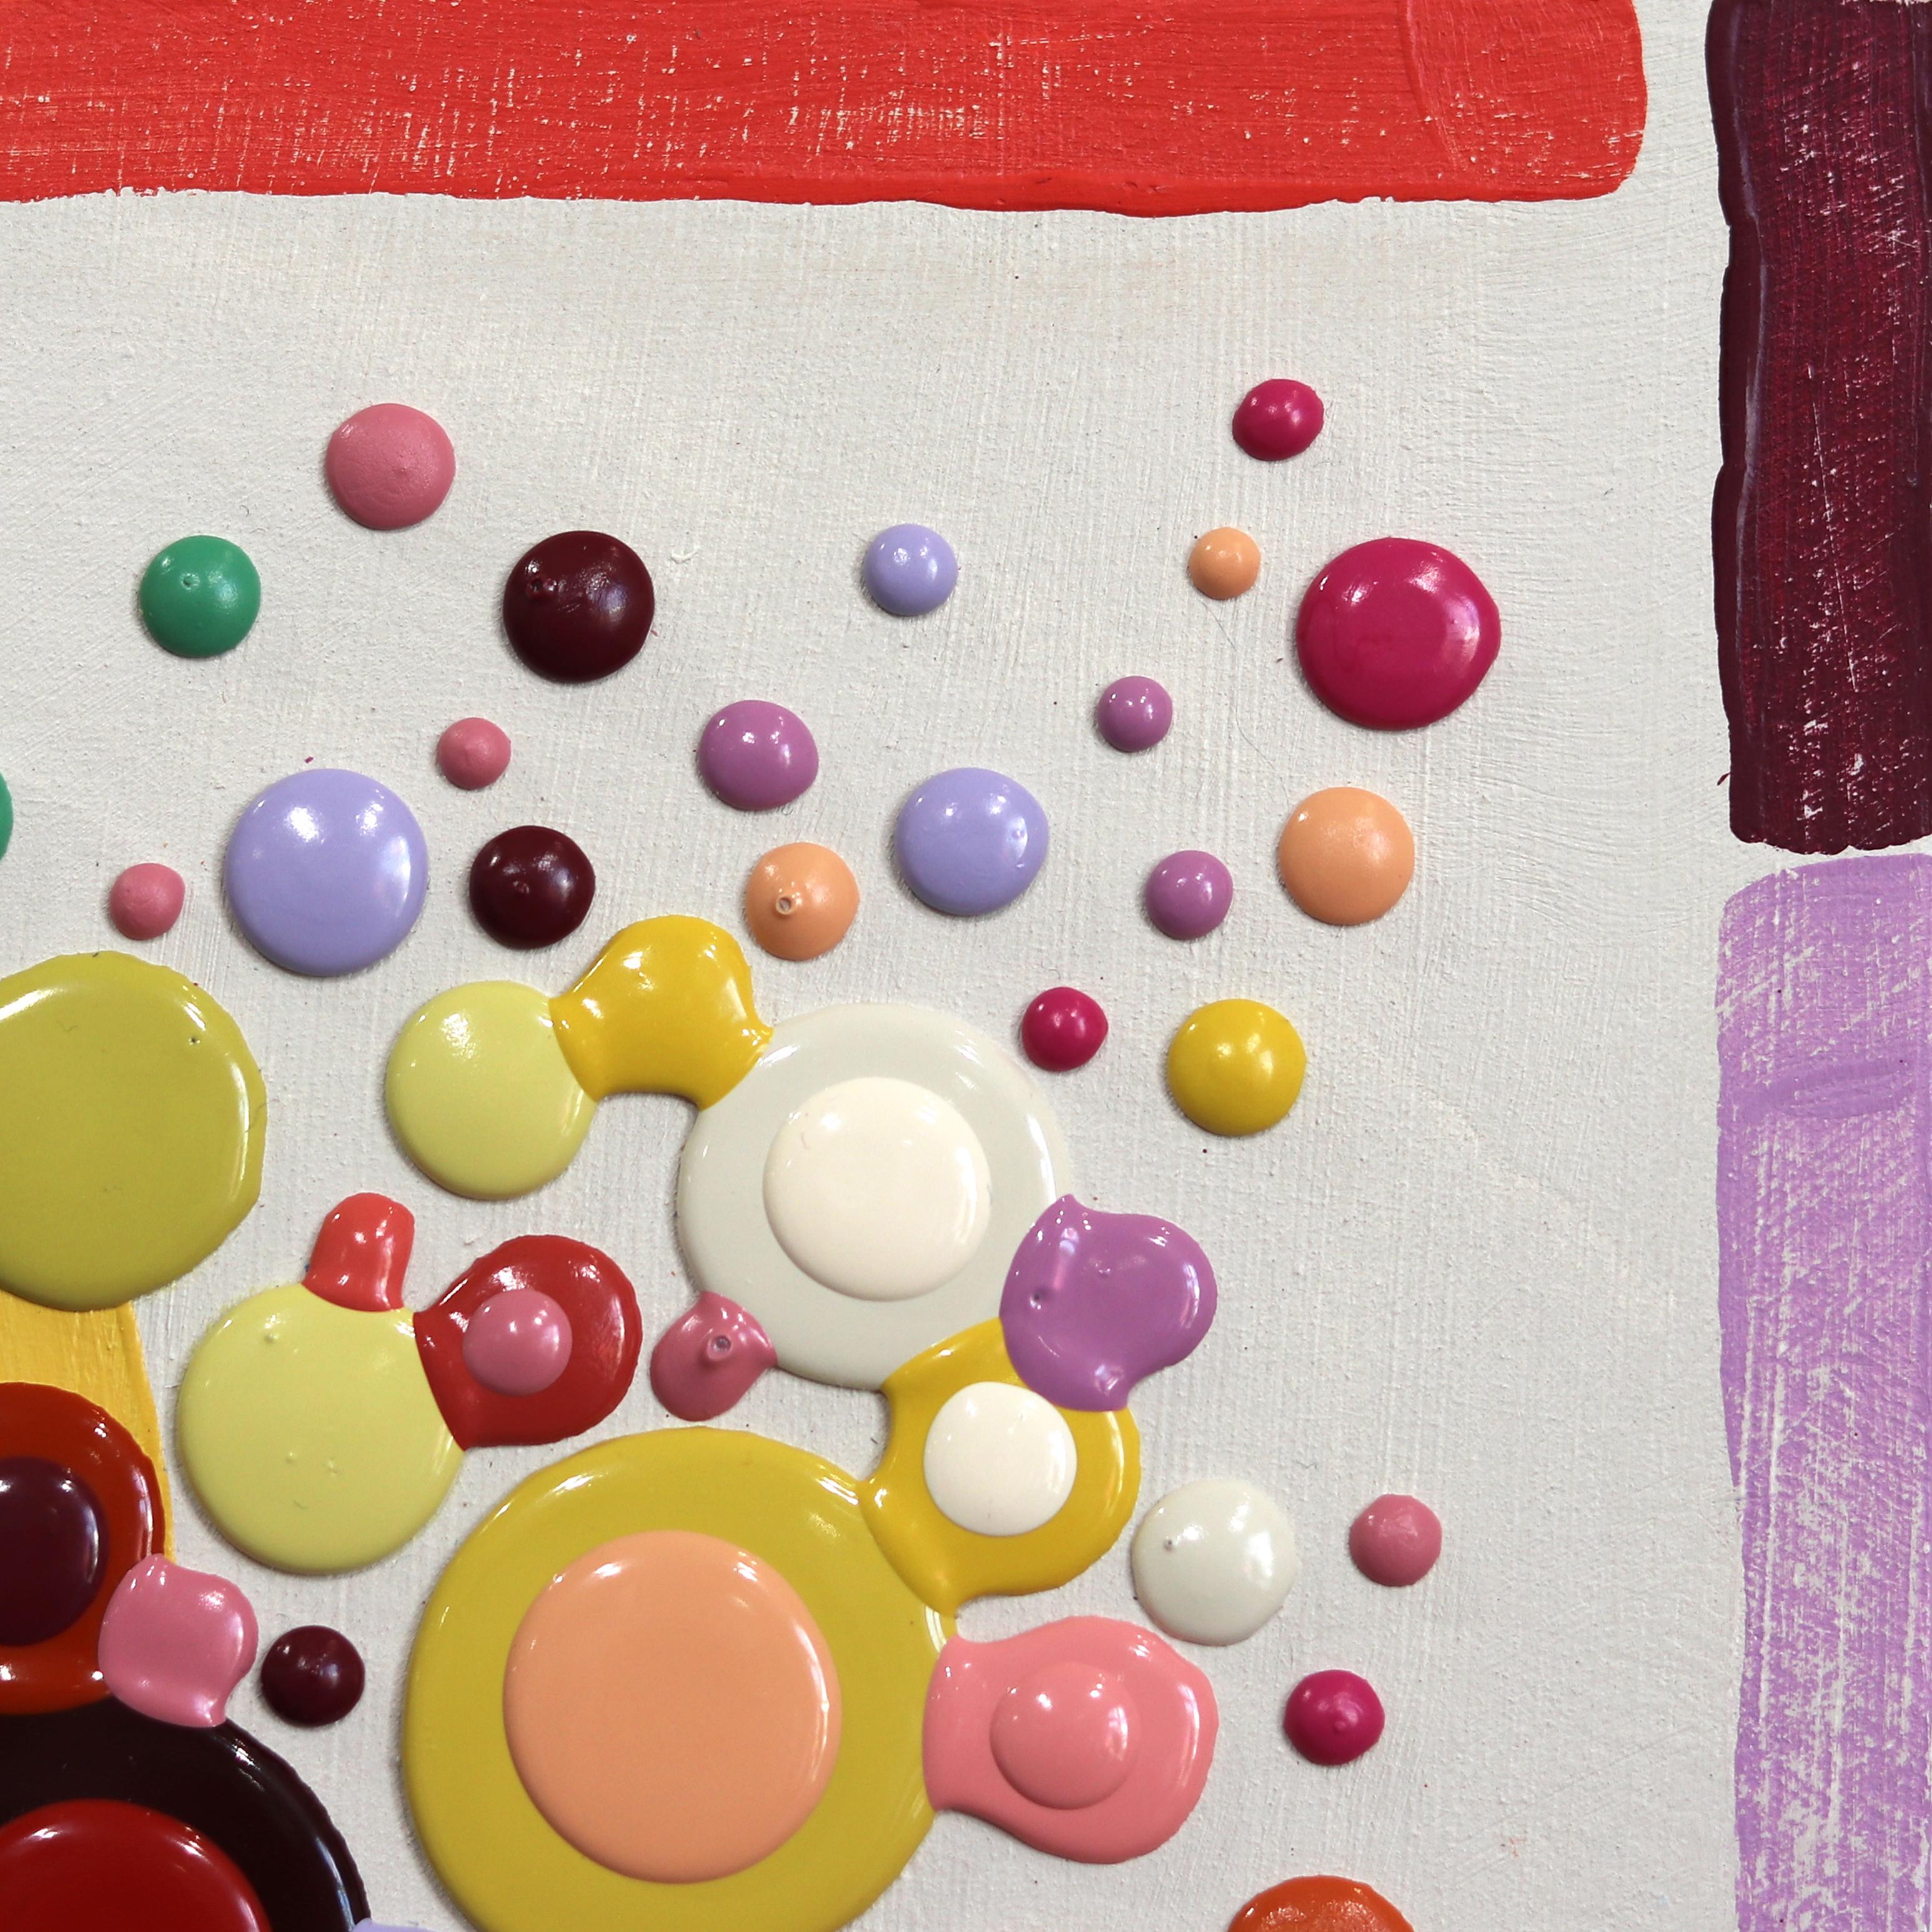 Sorbet - Original Saturated Colorful Dots Paint Droplets Contemporary Art For Sale 1